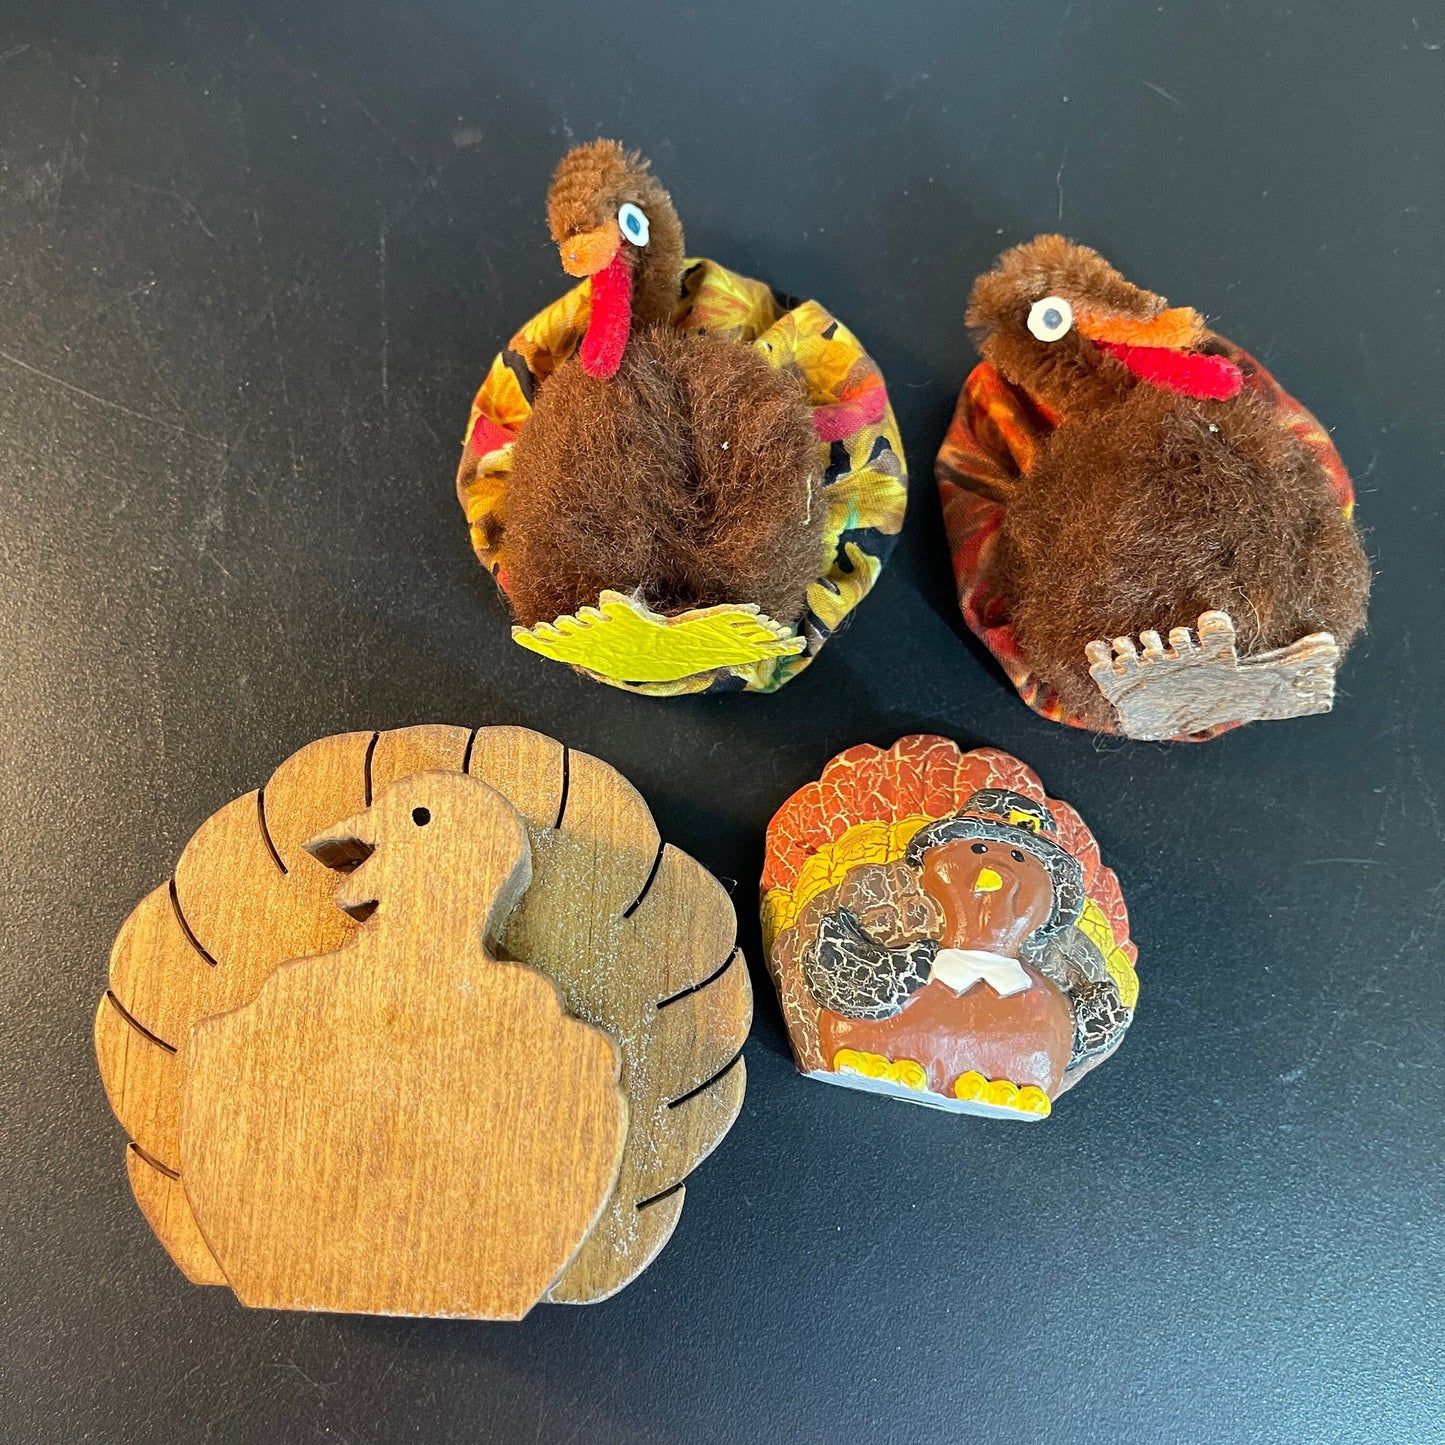 Happy Turkey Day lot of 4 fun miniature vintage collectible turkey decorations